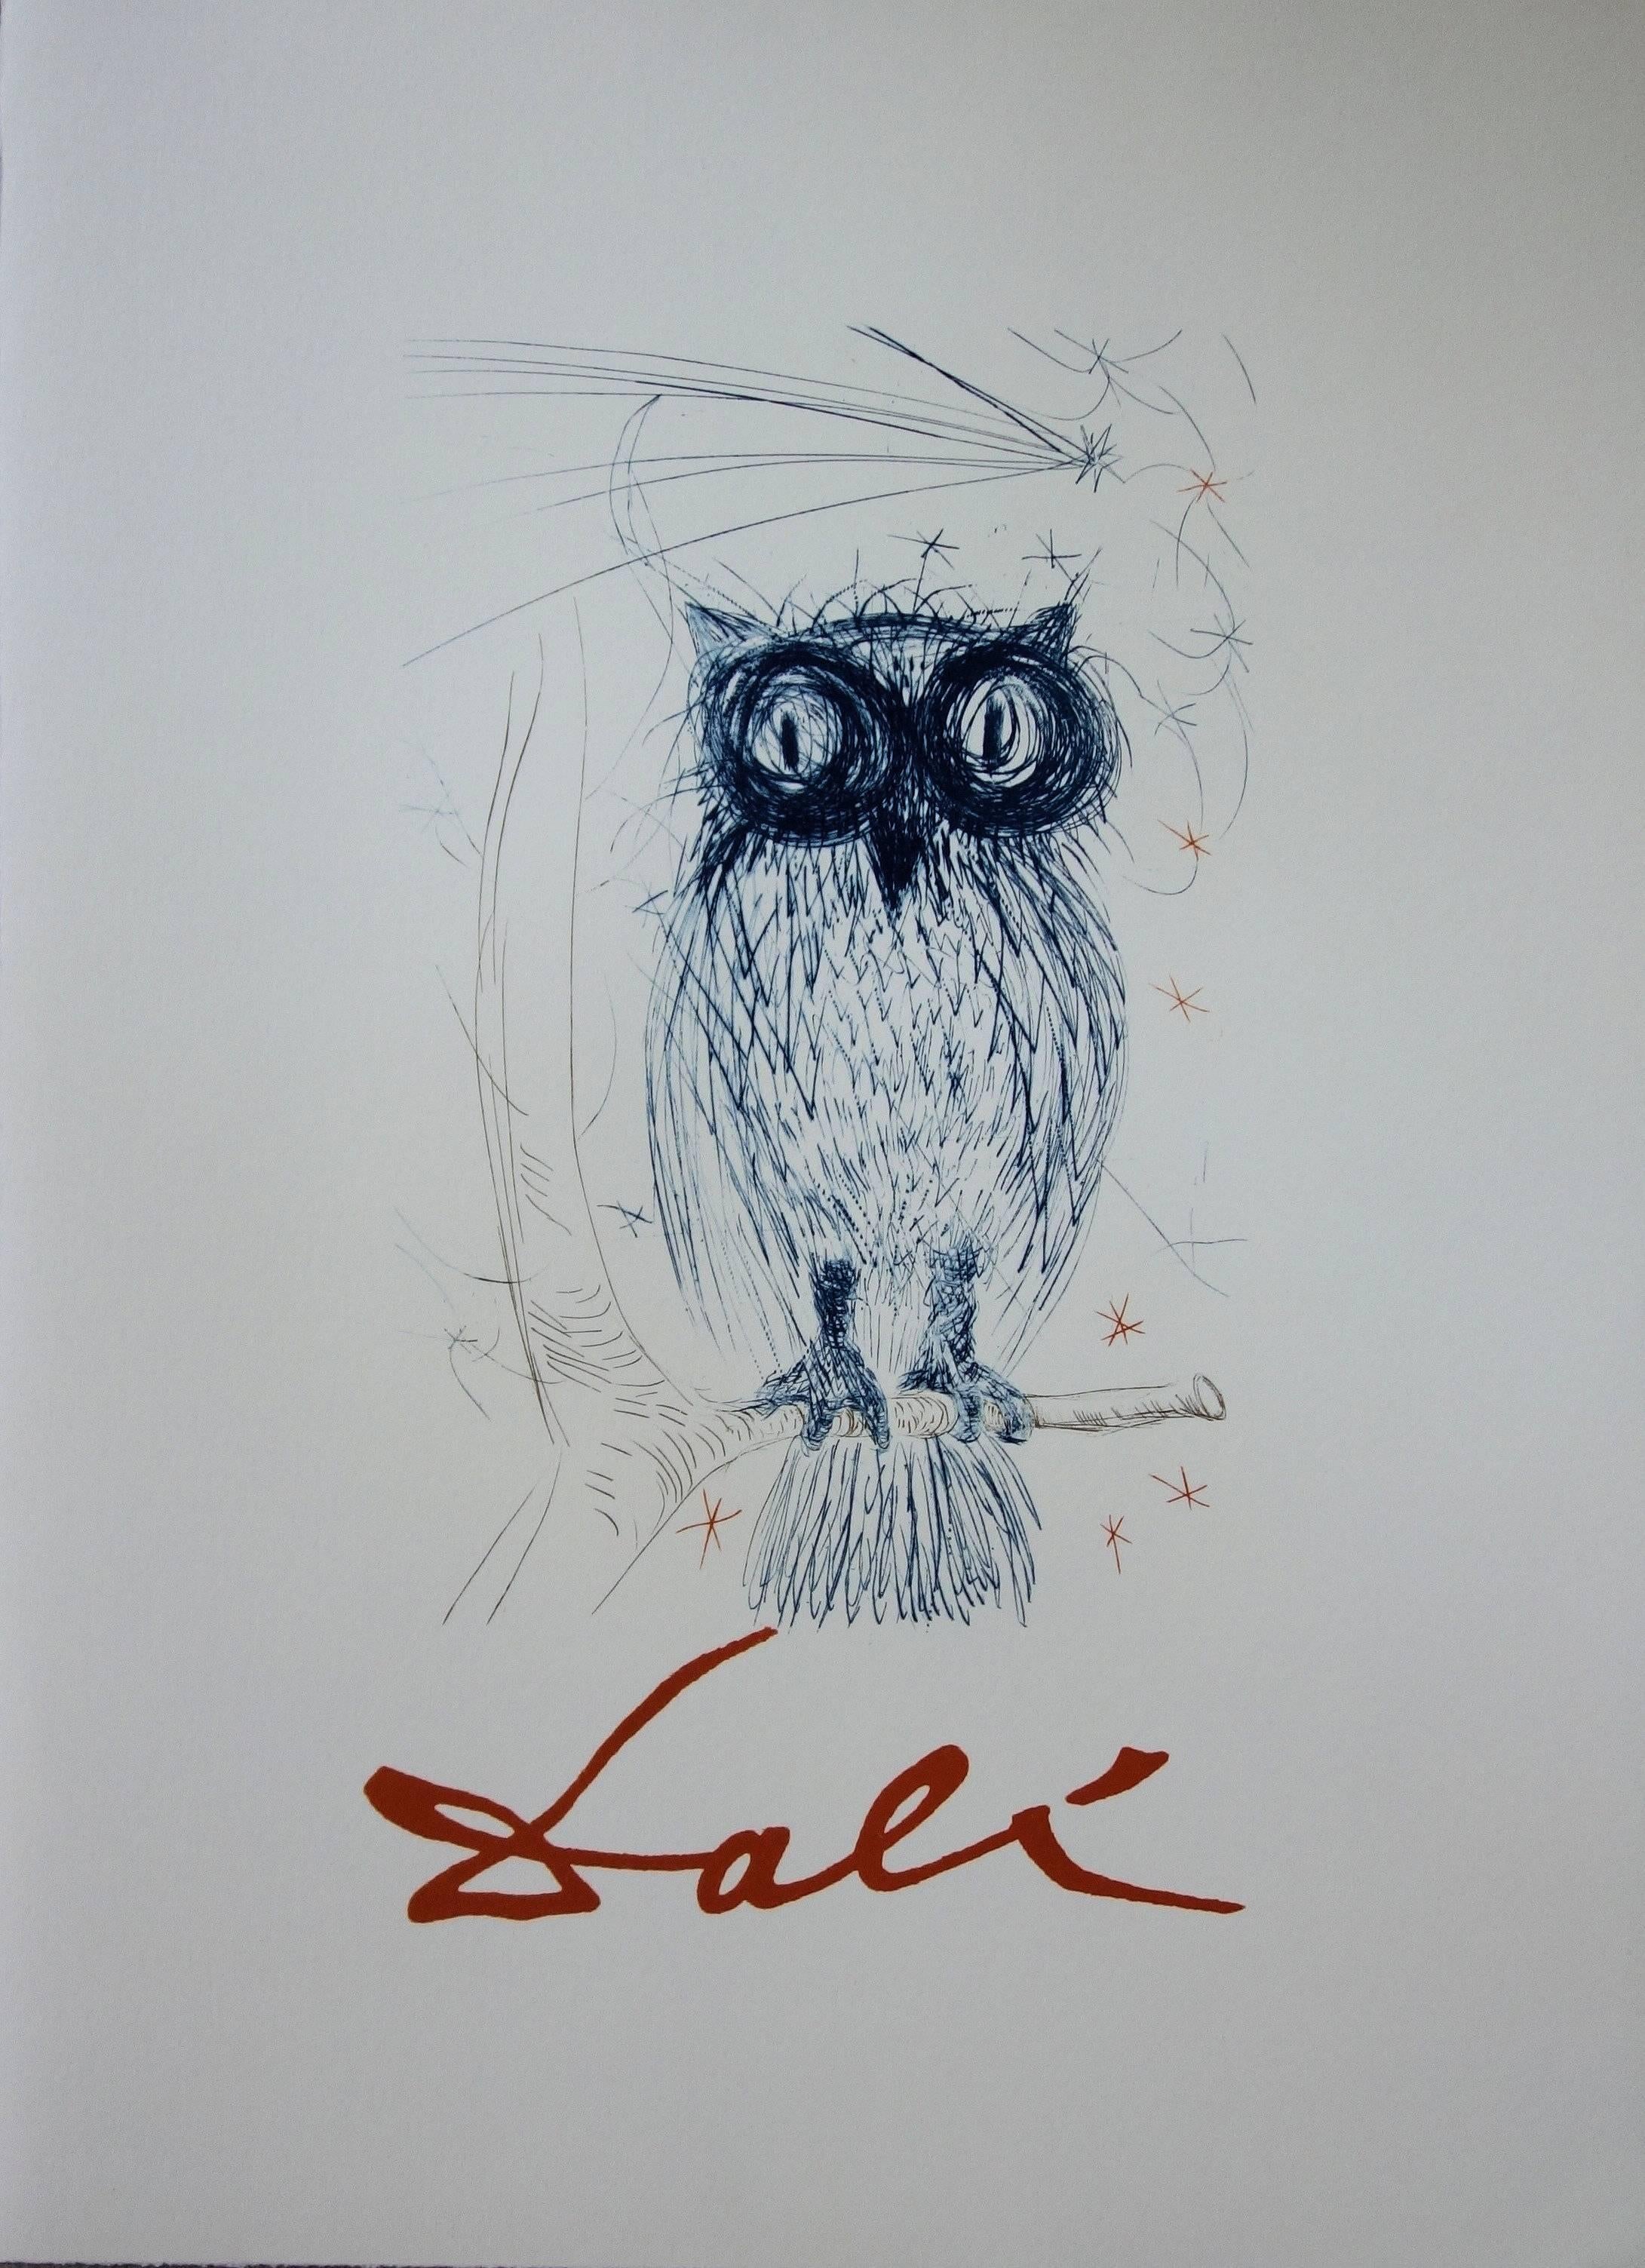 The Blue Owl - Lithograph - Edited by J. Schneider, 1983